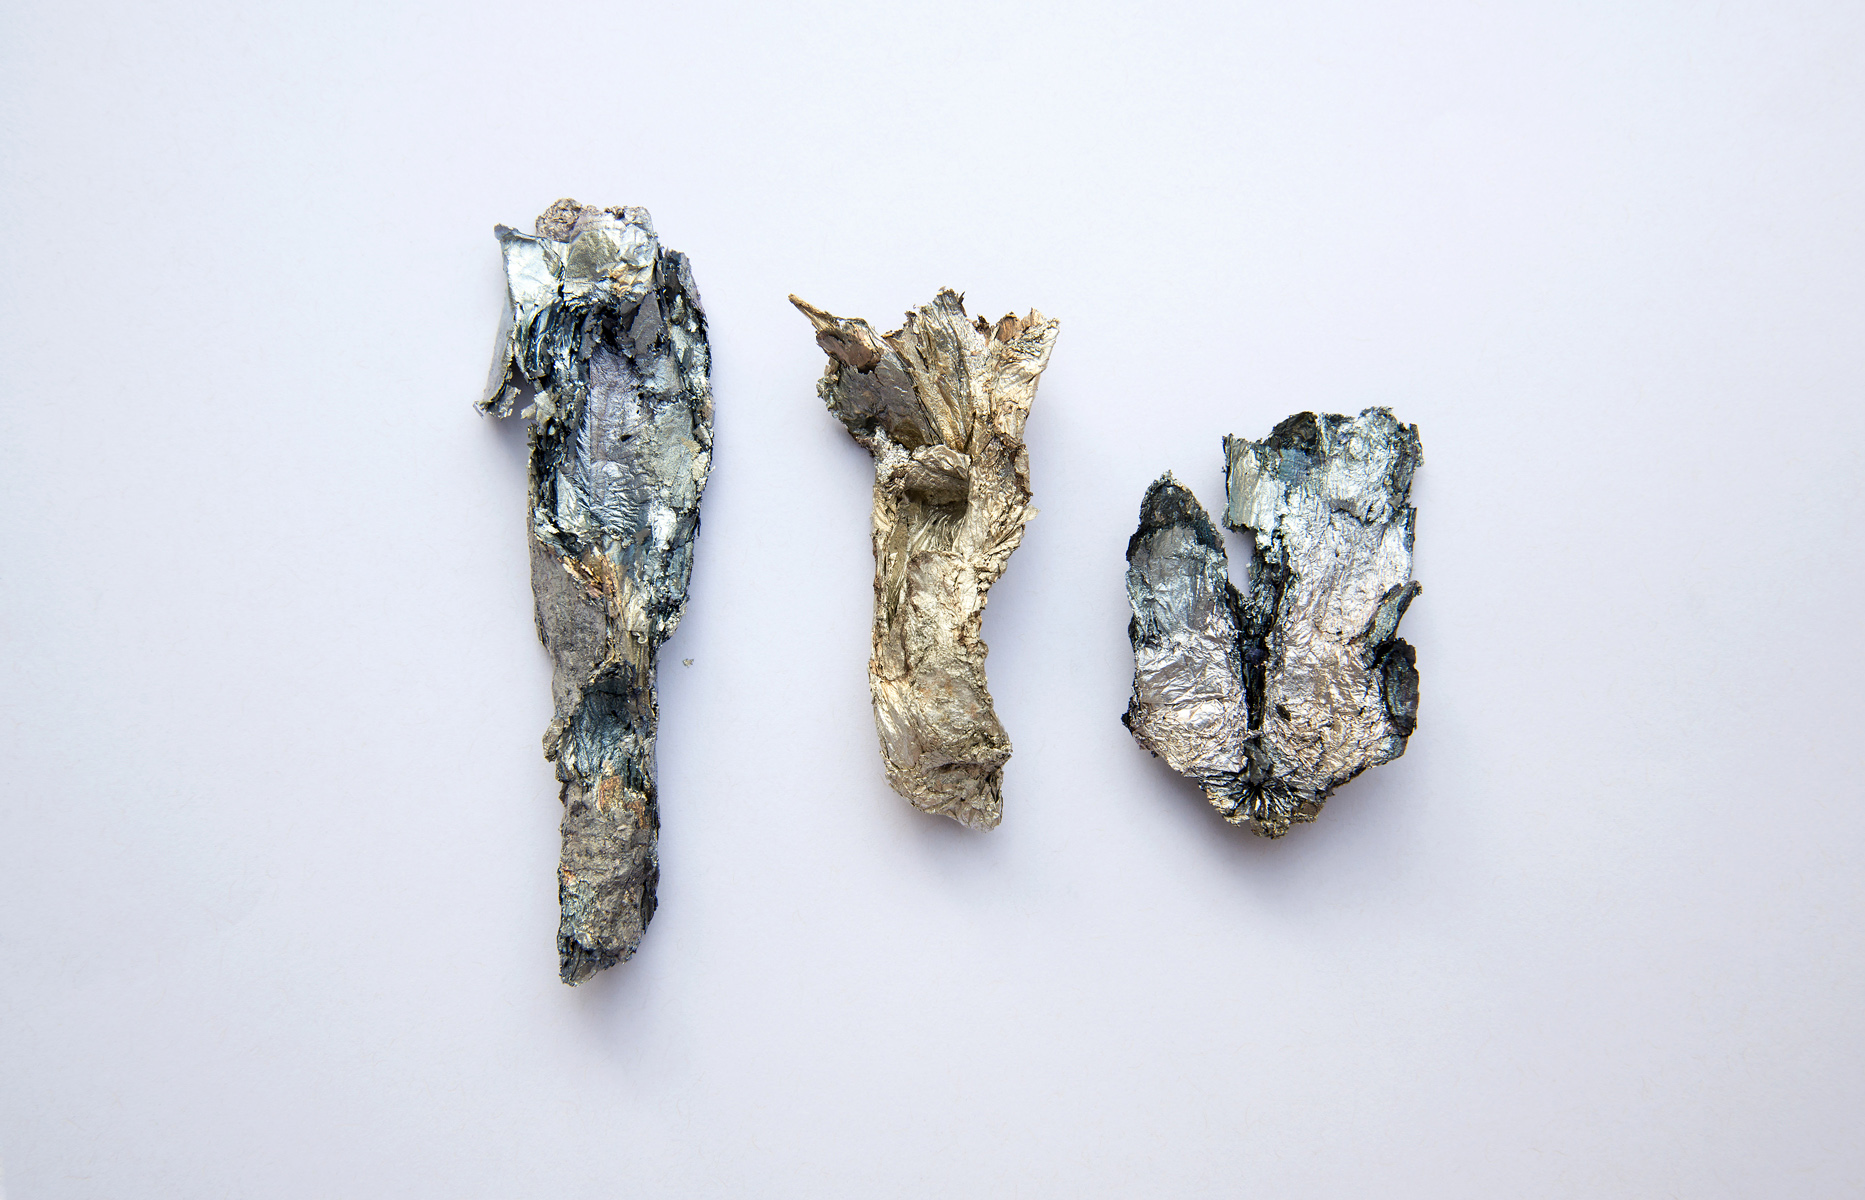 Three oxidized foil sculptures sit centered on a light background.